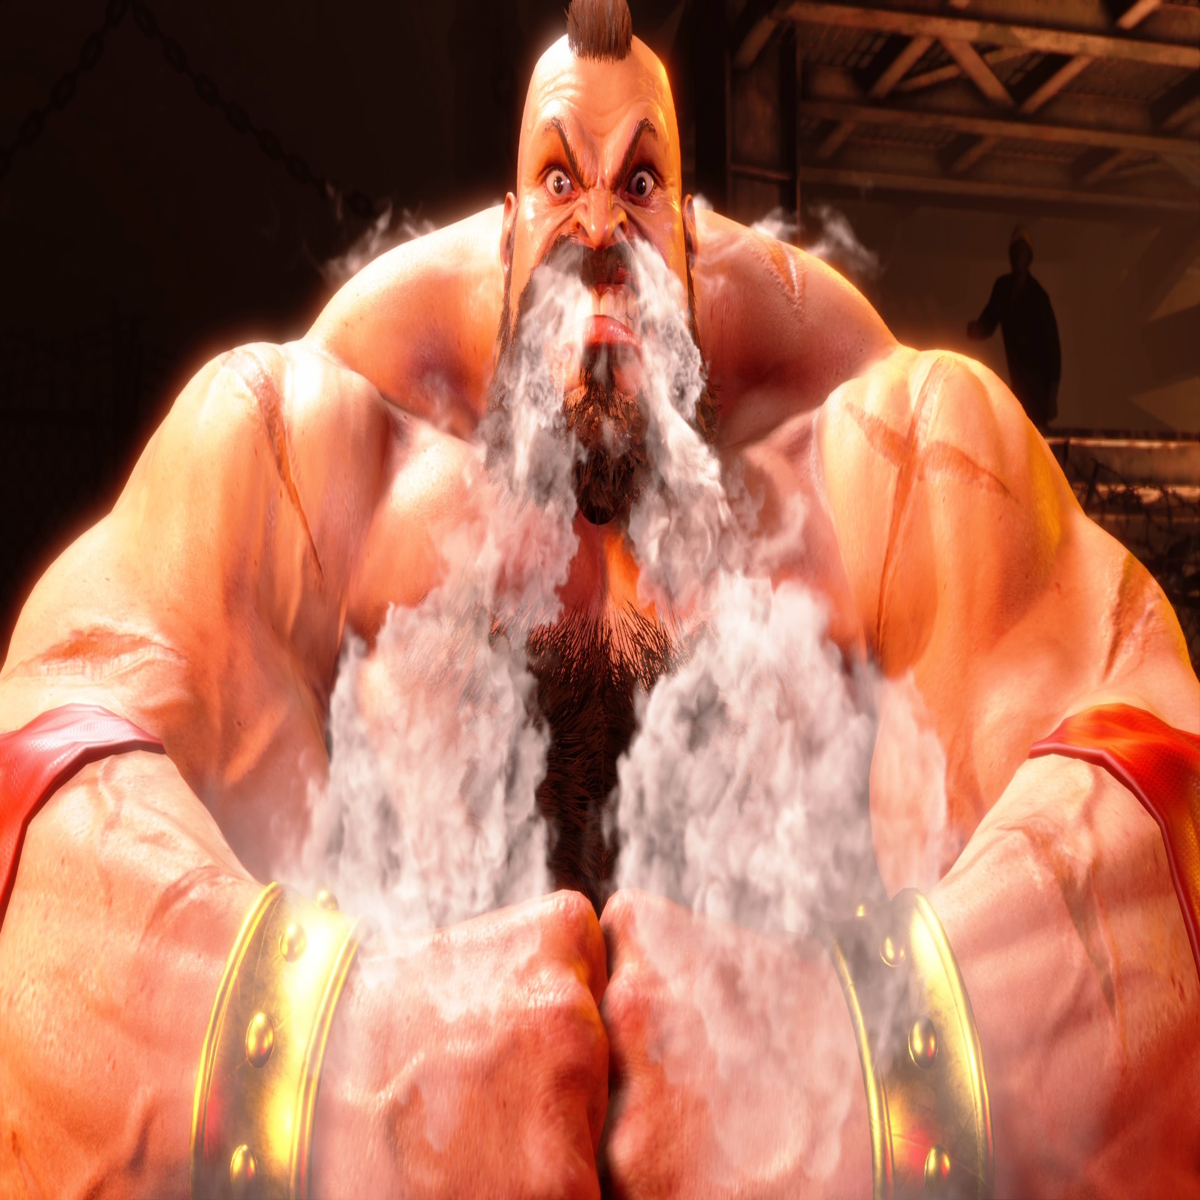 Zangief, Cammy, and Lily Revealed For SF6